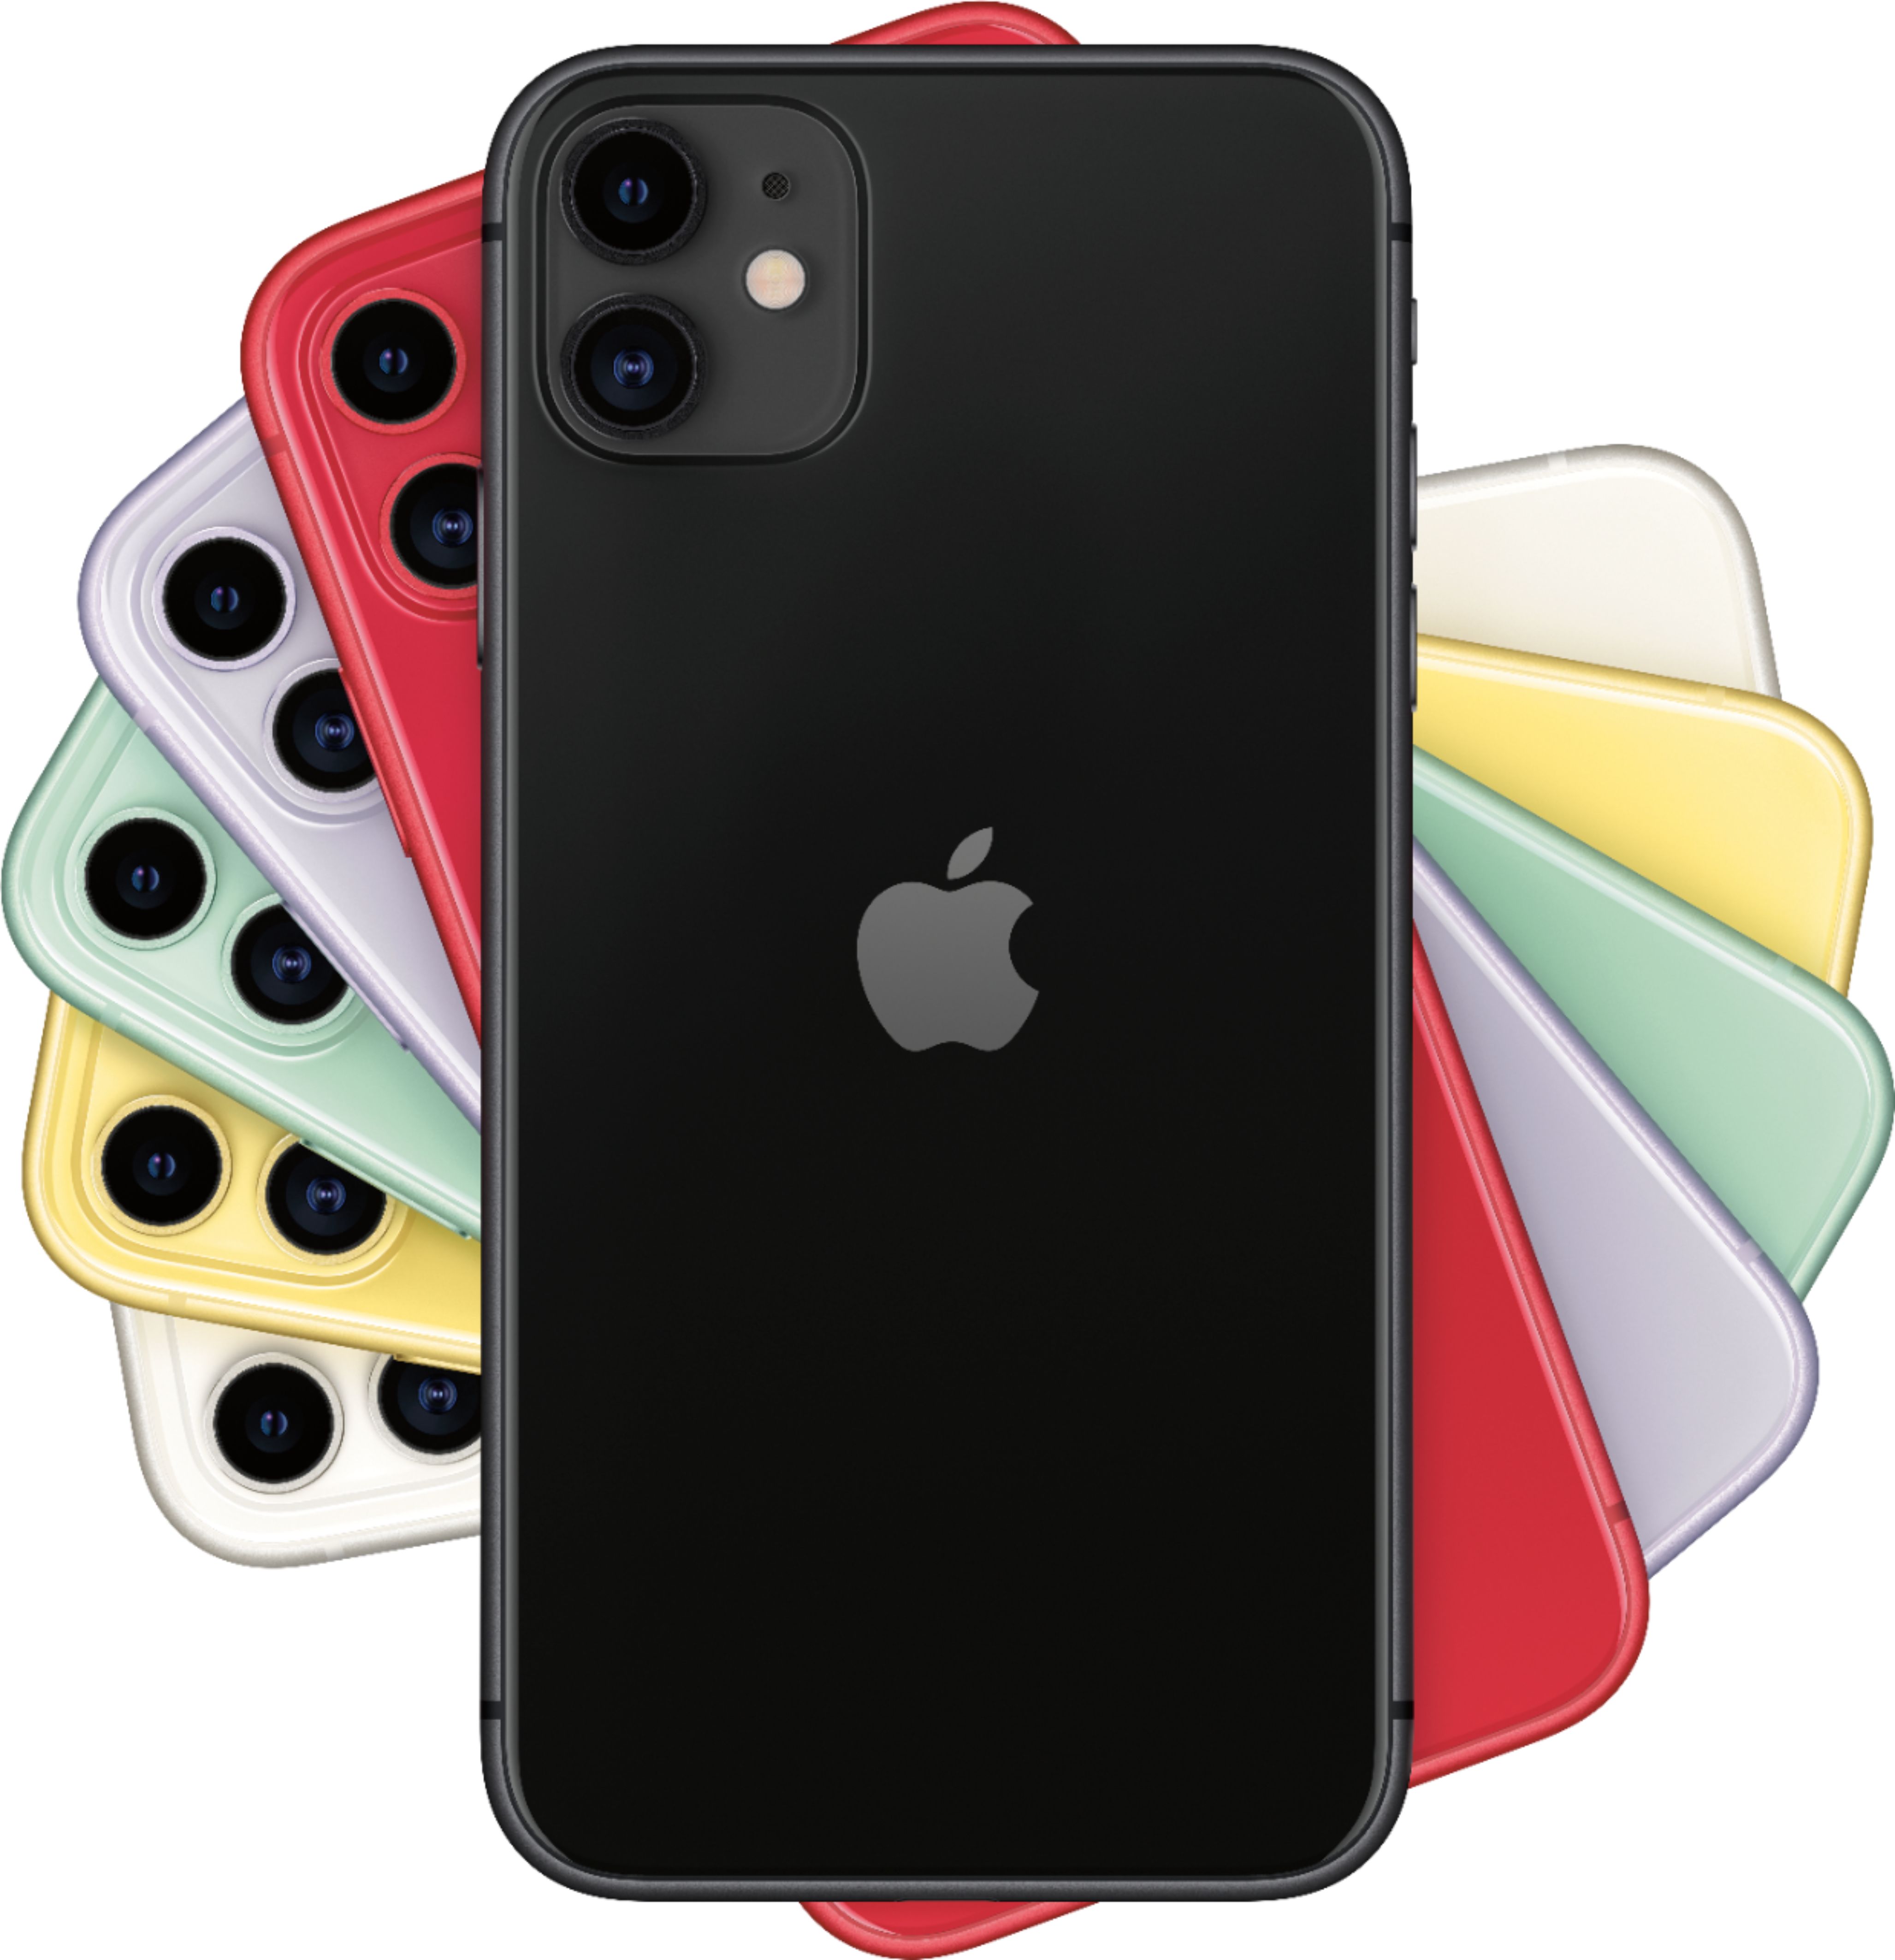 Iphone 12 Iphone 11 Price In India 64gb 2018 Promo Codes For Roblox Robux - apple power logo wallpaper ipad roblox